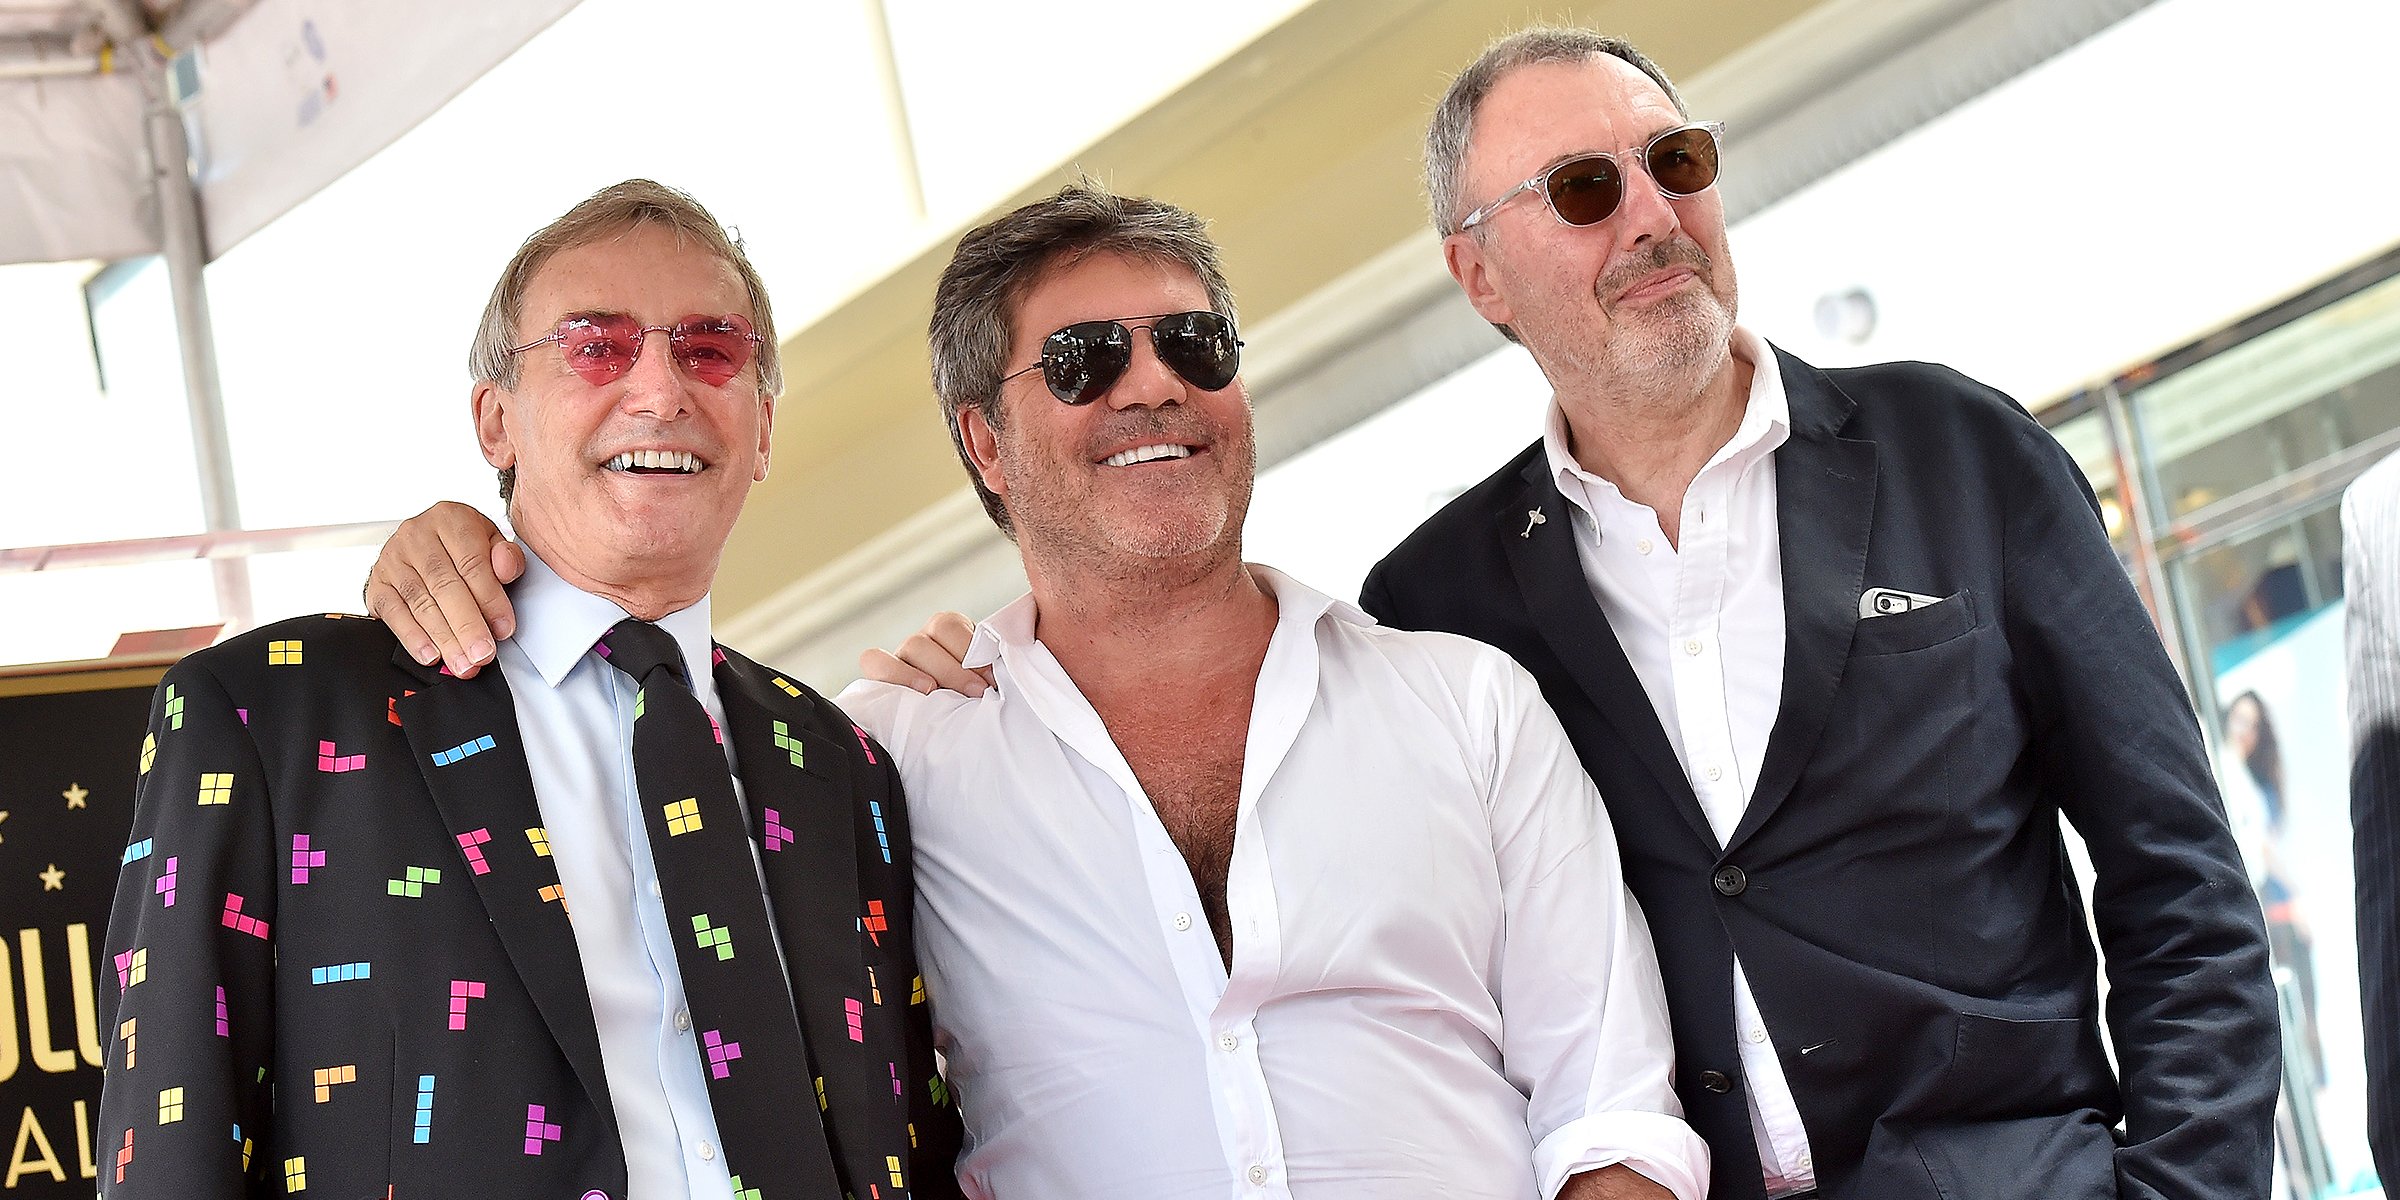 Simon Cowell with brothers Nicholas Cowell and Tony Cowell. | Source: Getty Images